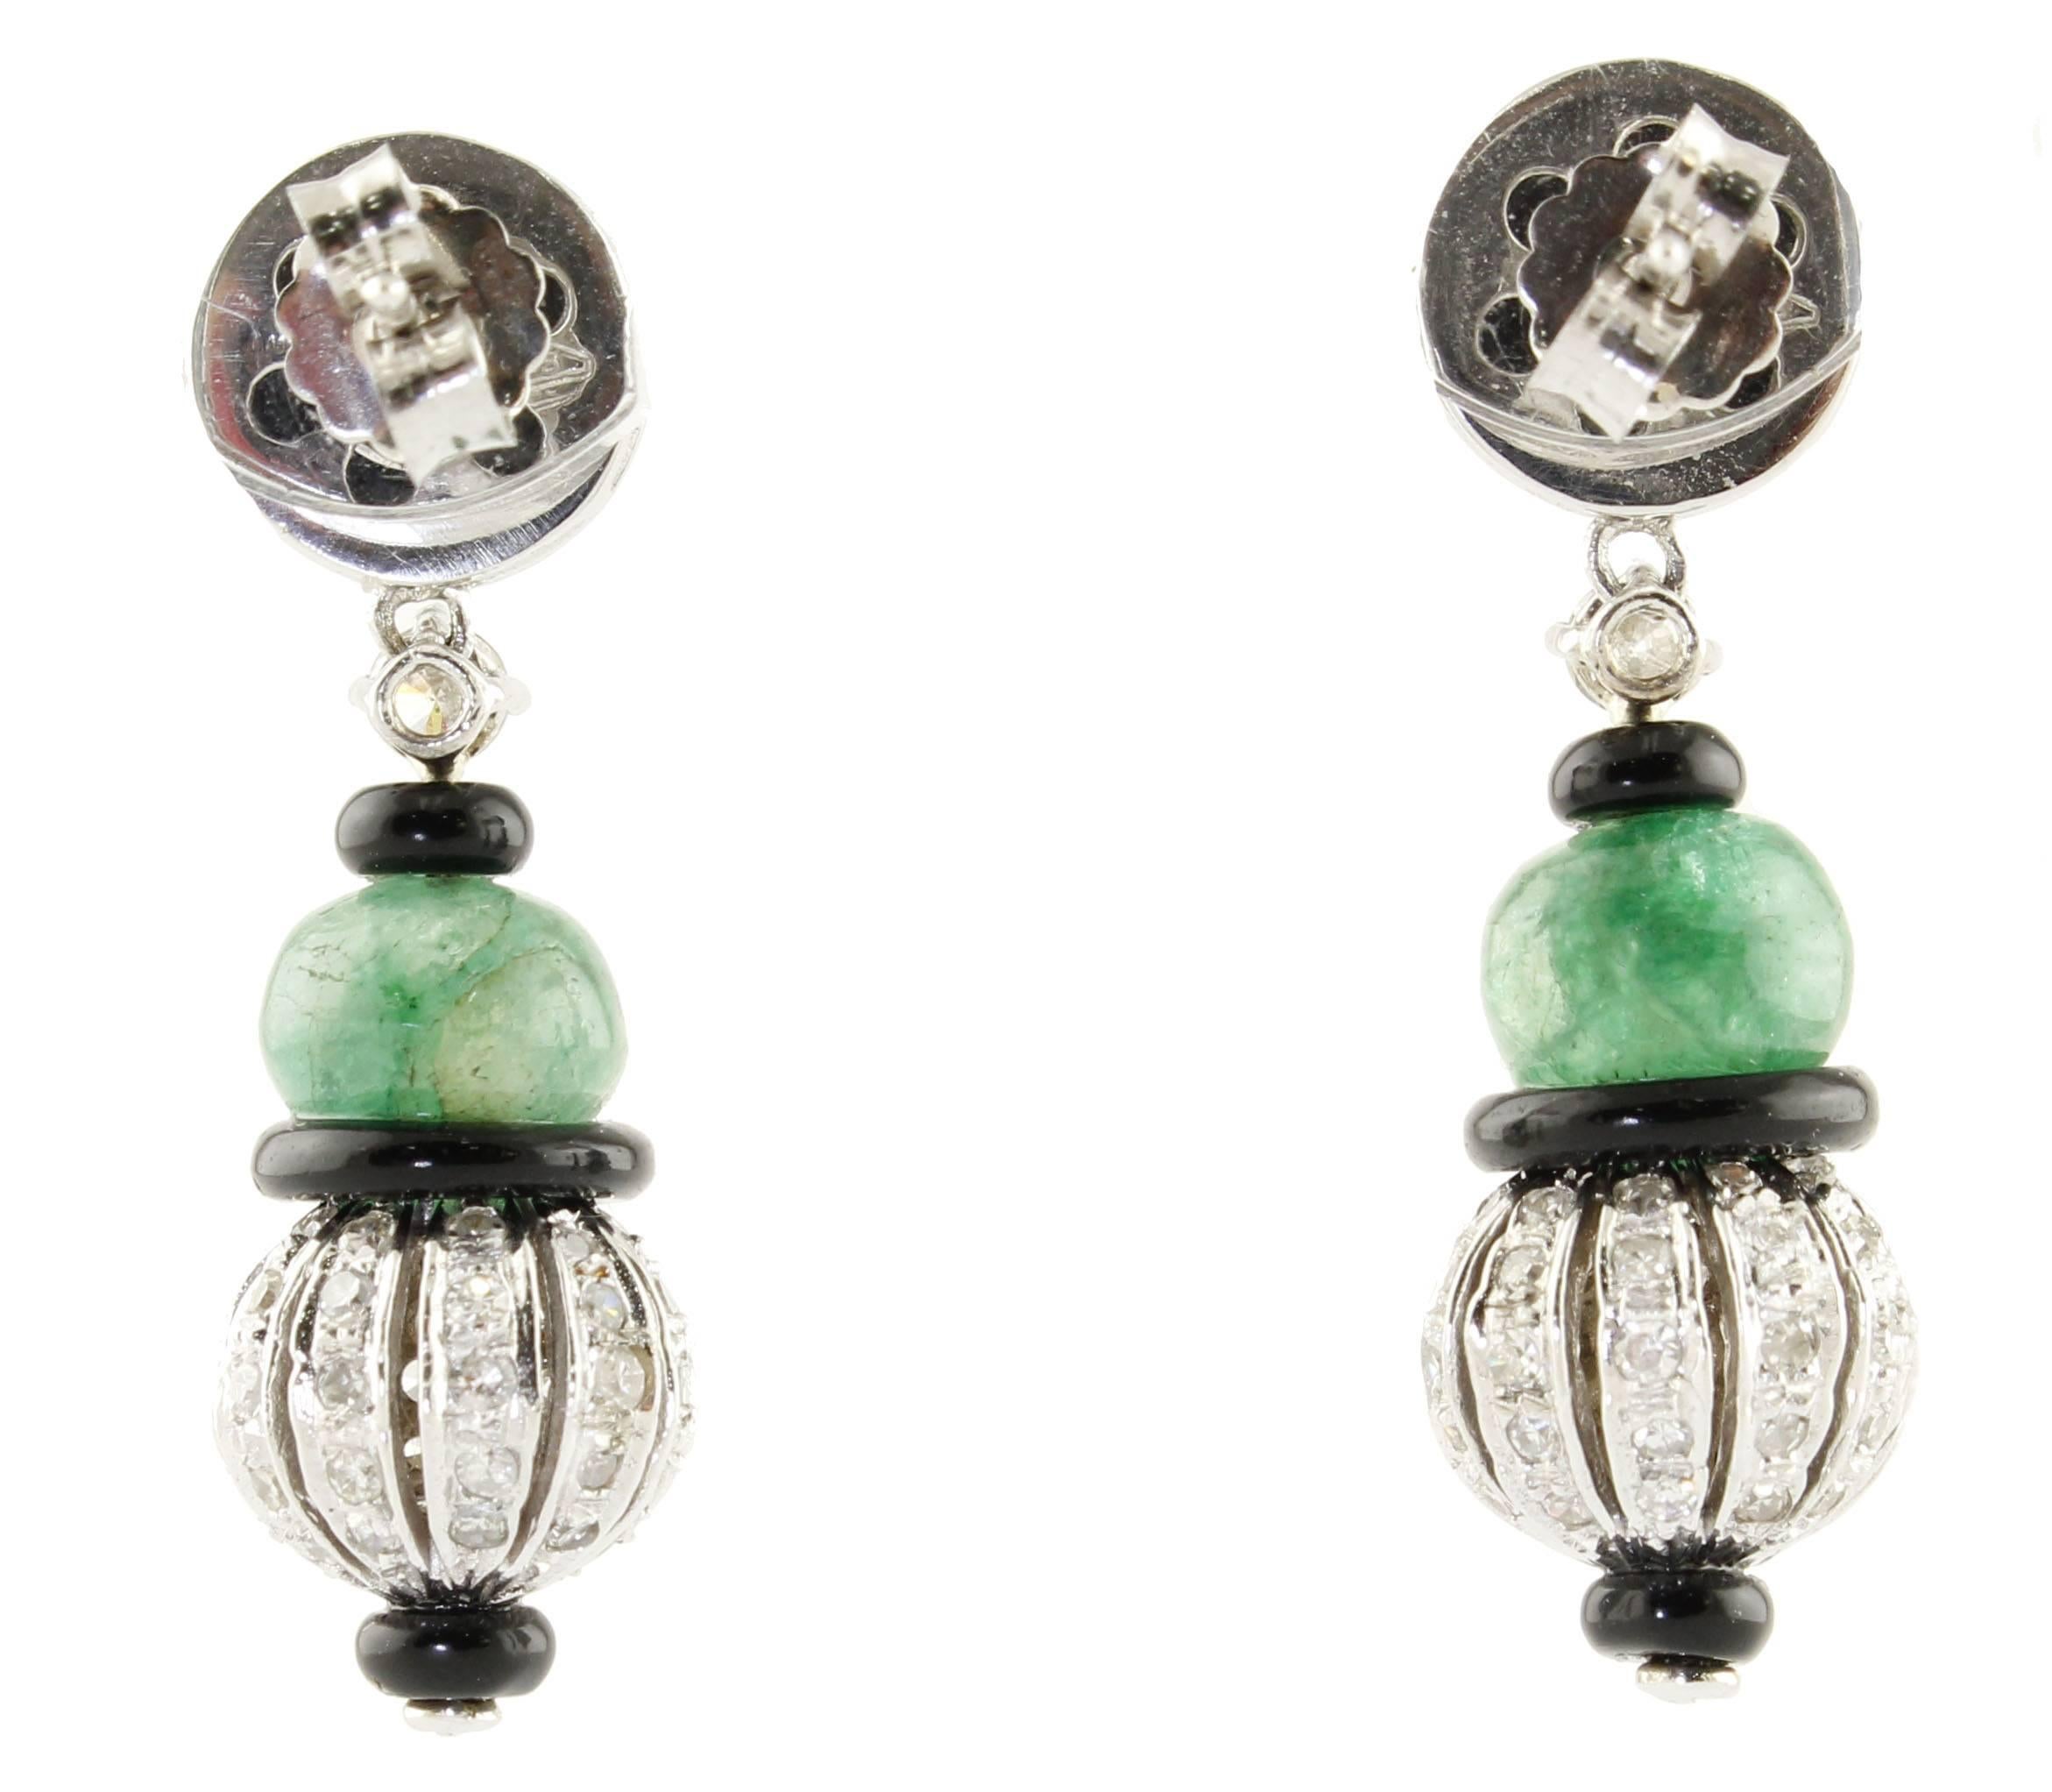 Very elegant 14 kt white gold drop earrings with 1.39 ct diamonds, 7.06 ct emeralds and 0.70 g onyx. 
Diamonds ct 1.39
Emeralds ct 7.06
Onyx gr 0.70
Total weight gr 8.10
RF ++ fuio